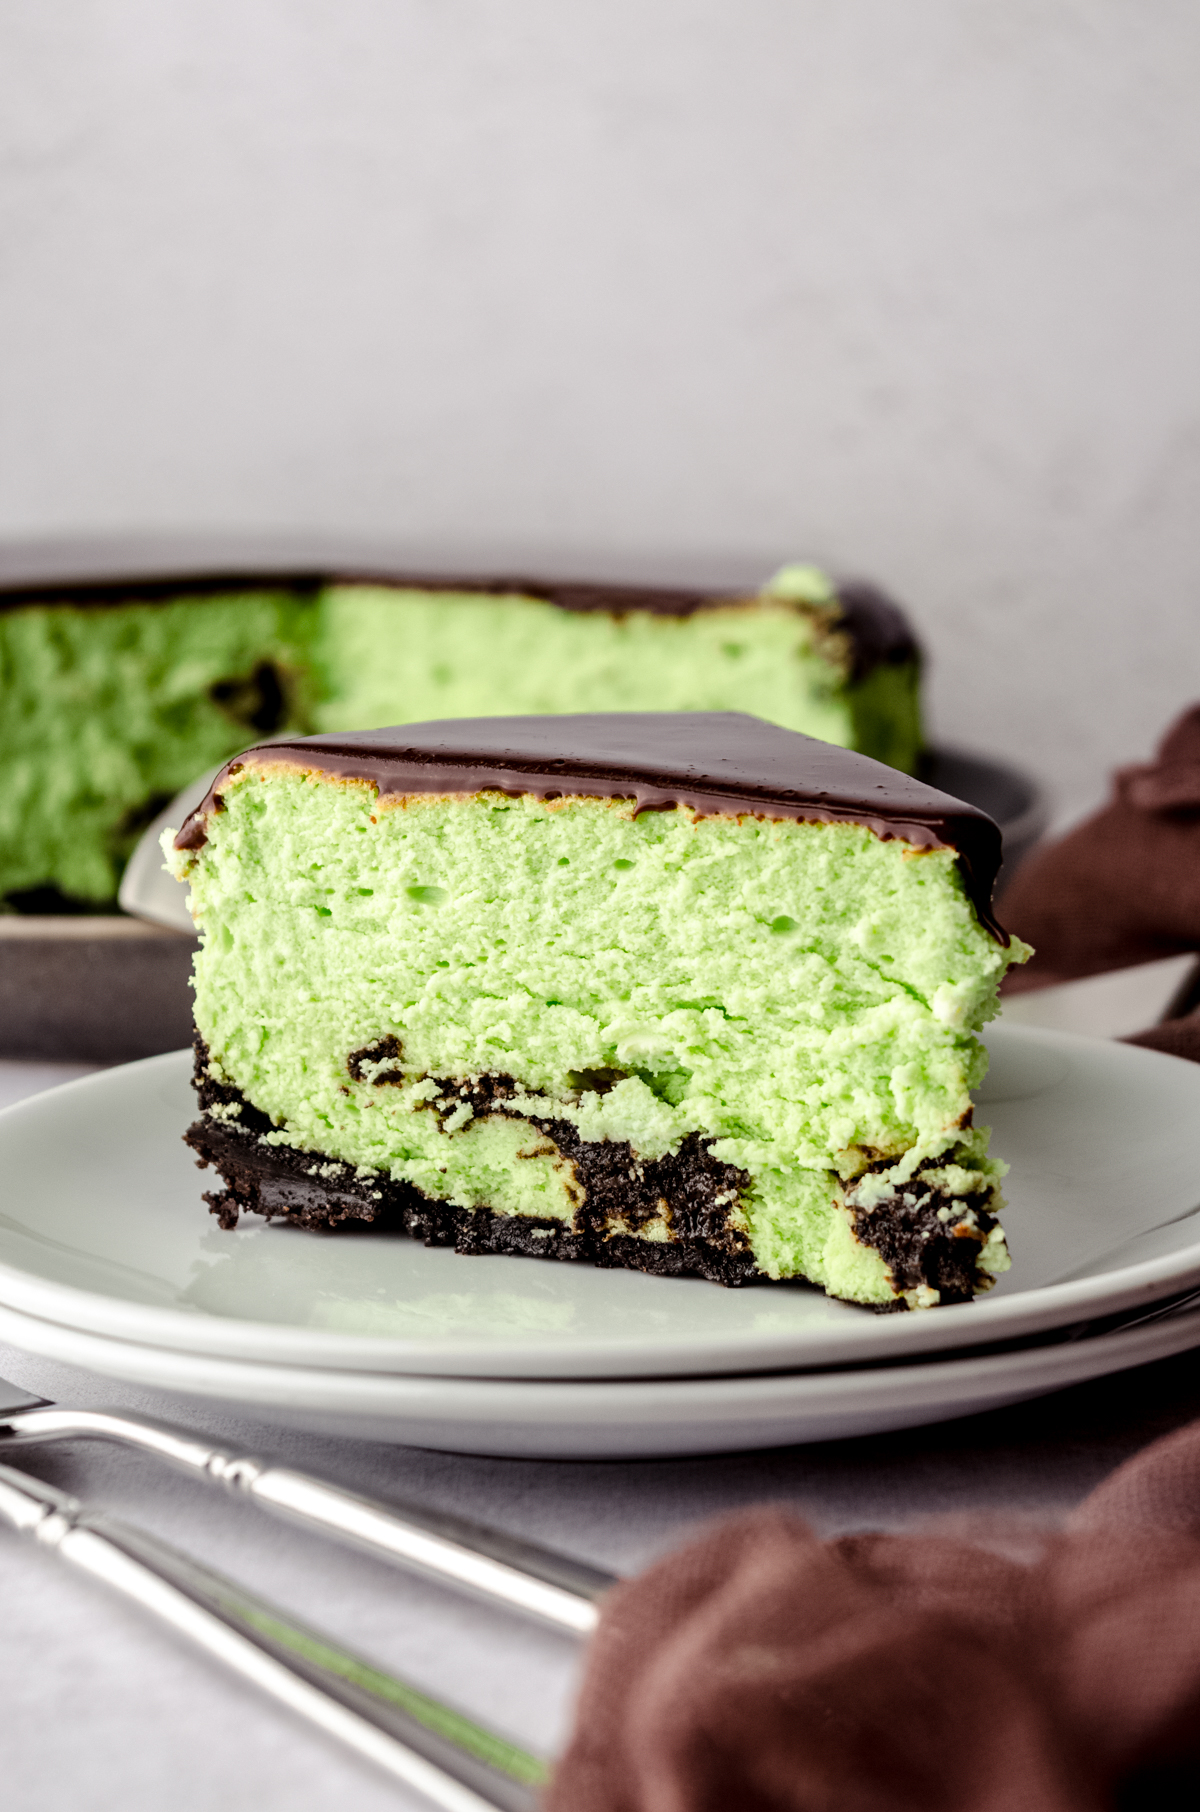 A slice of mint chocolate cheesecake on a plate.